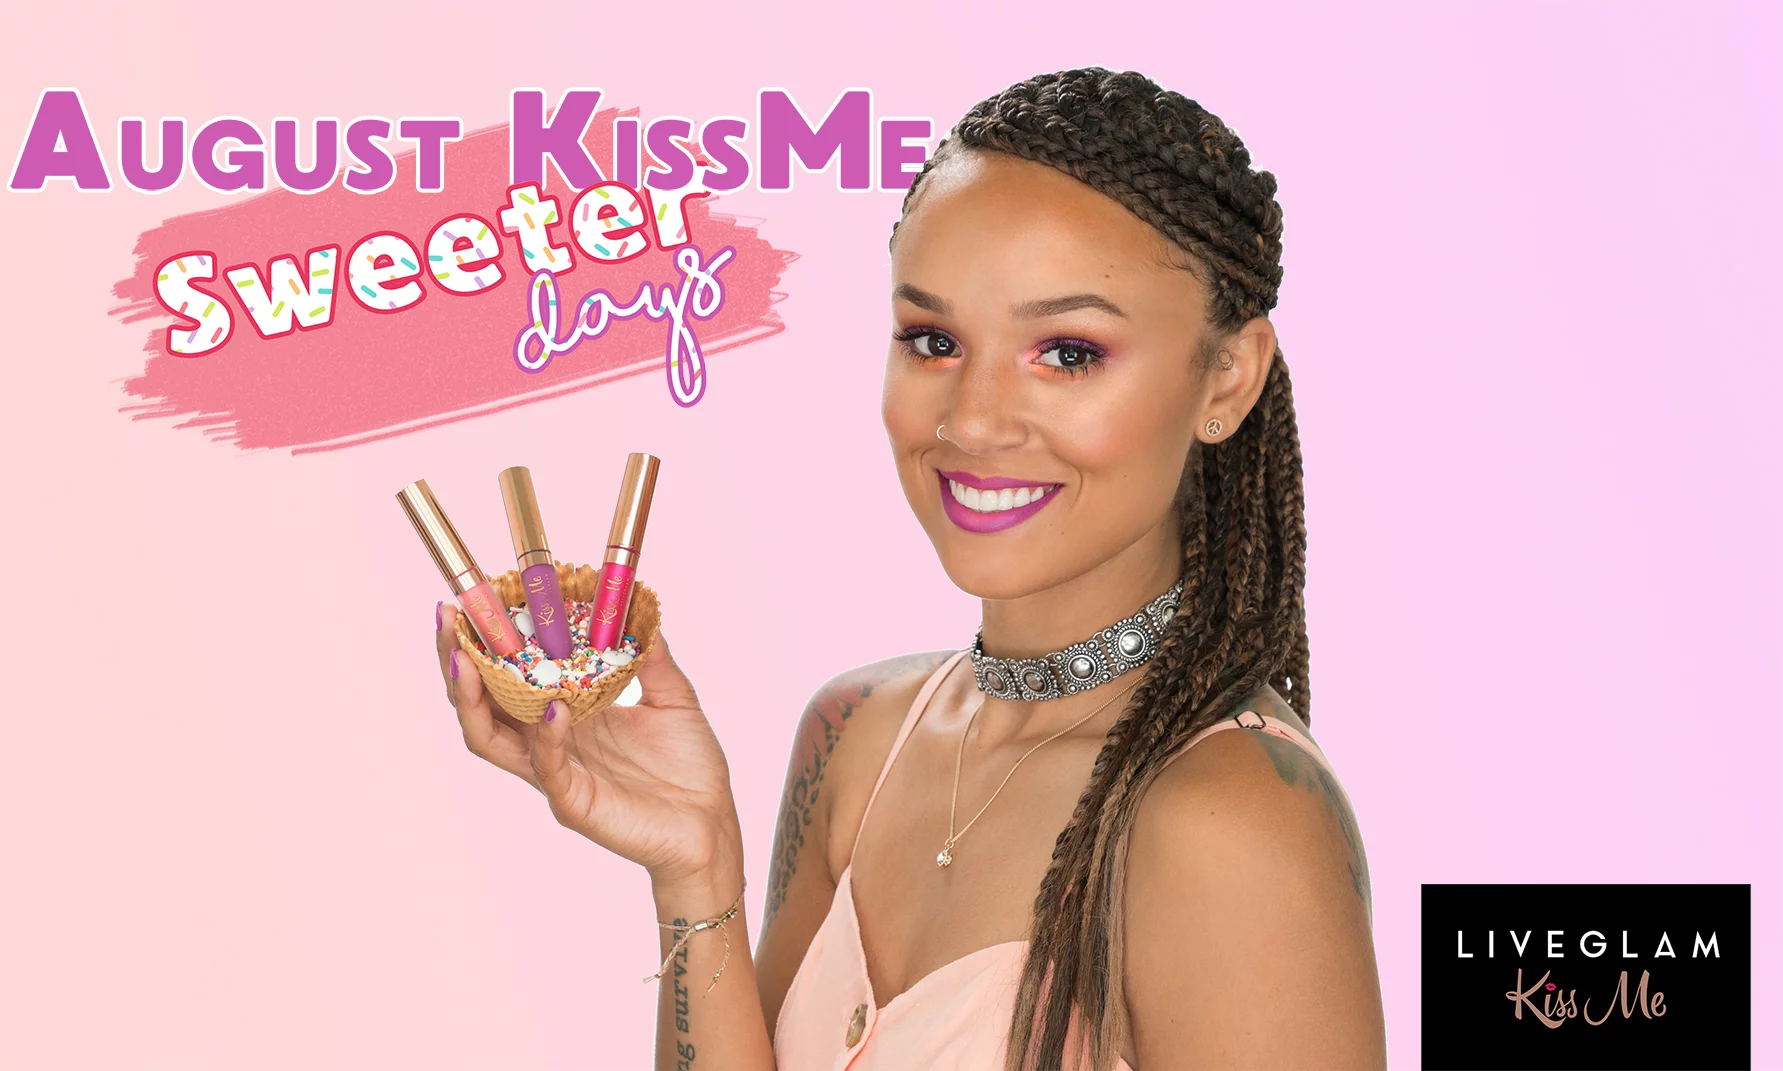 August KissMe: Sweeter Days Collection!